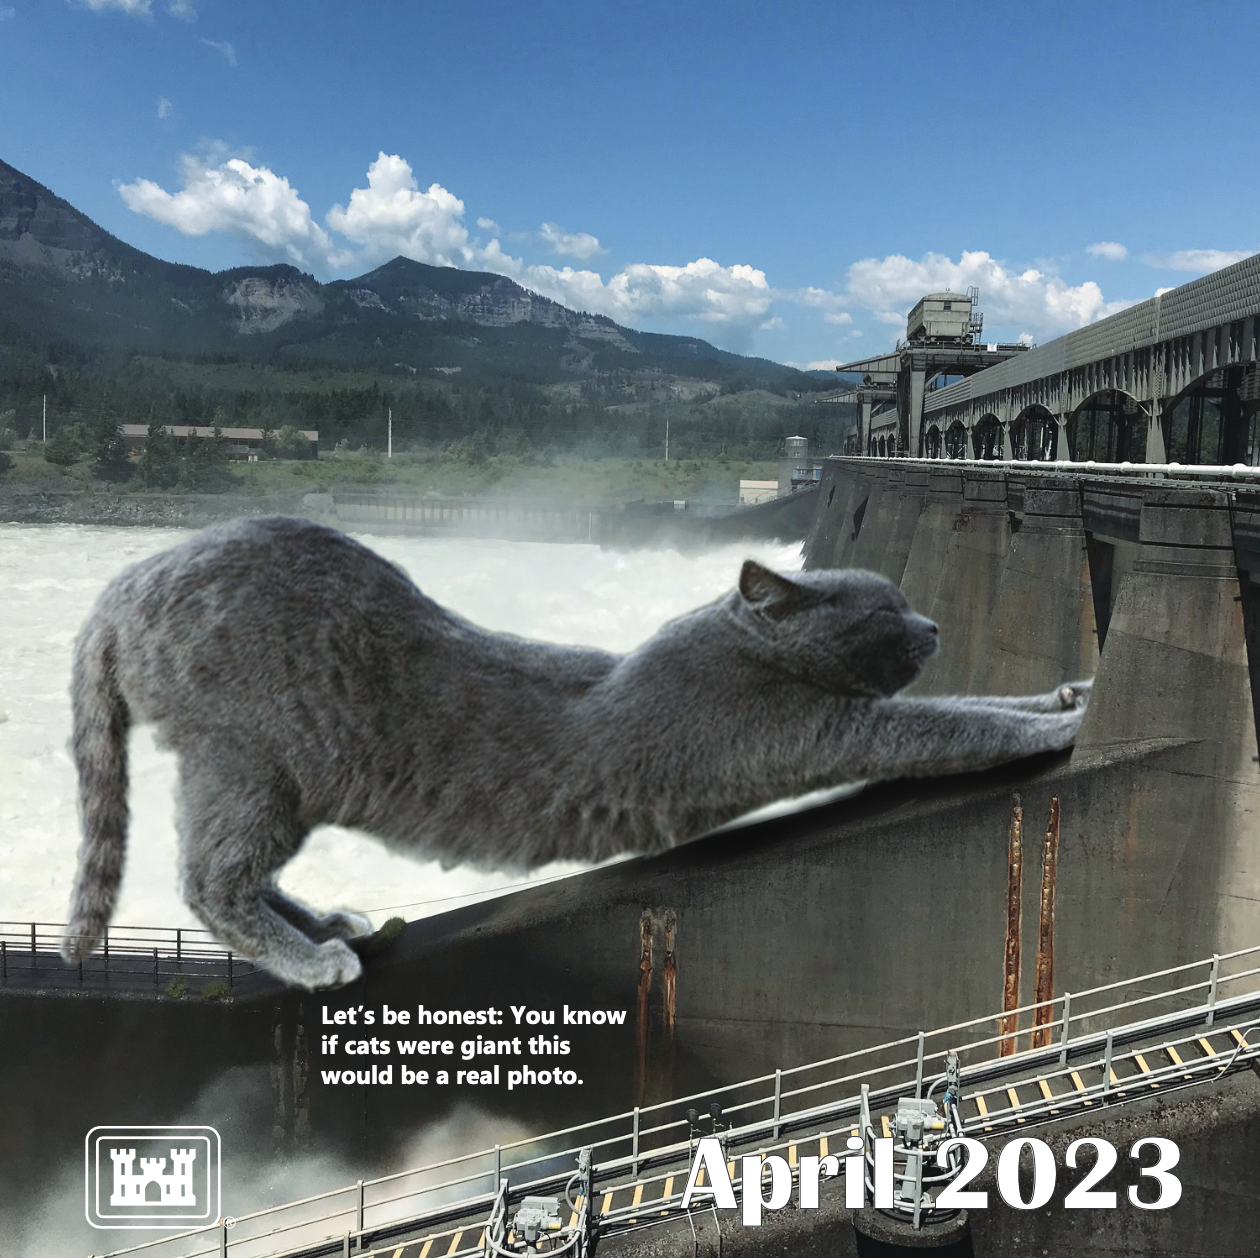 The Army Corps of Engineers Made a 2023 Cat Calendar, and It’s Glorious